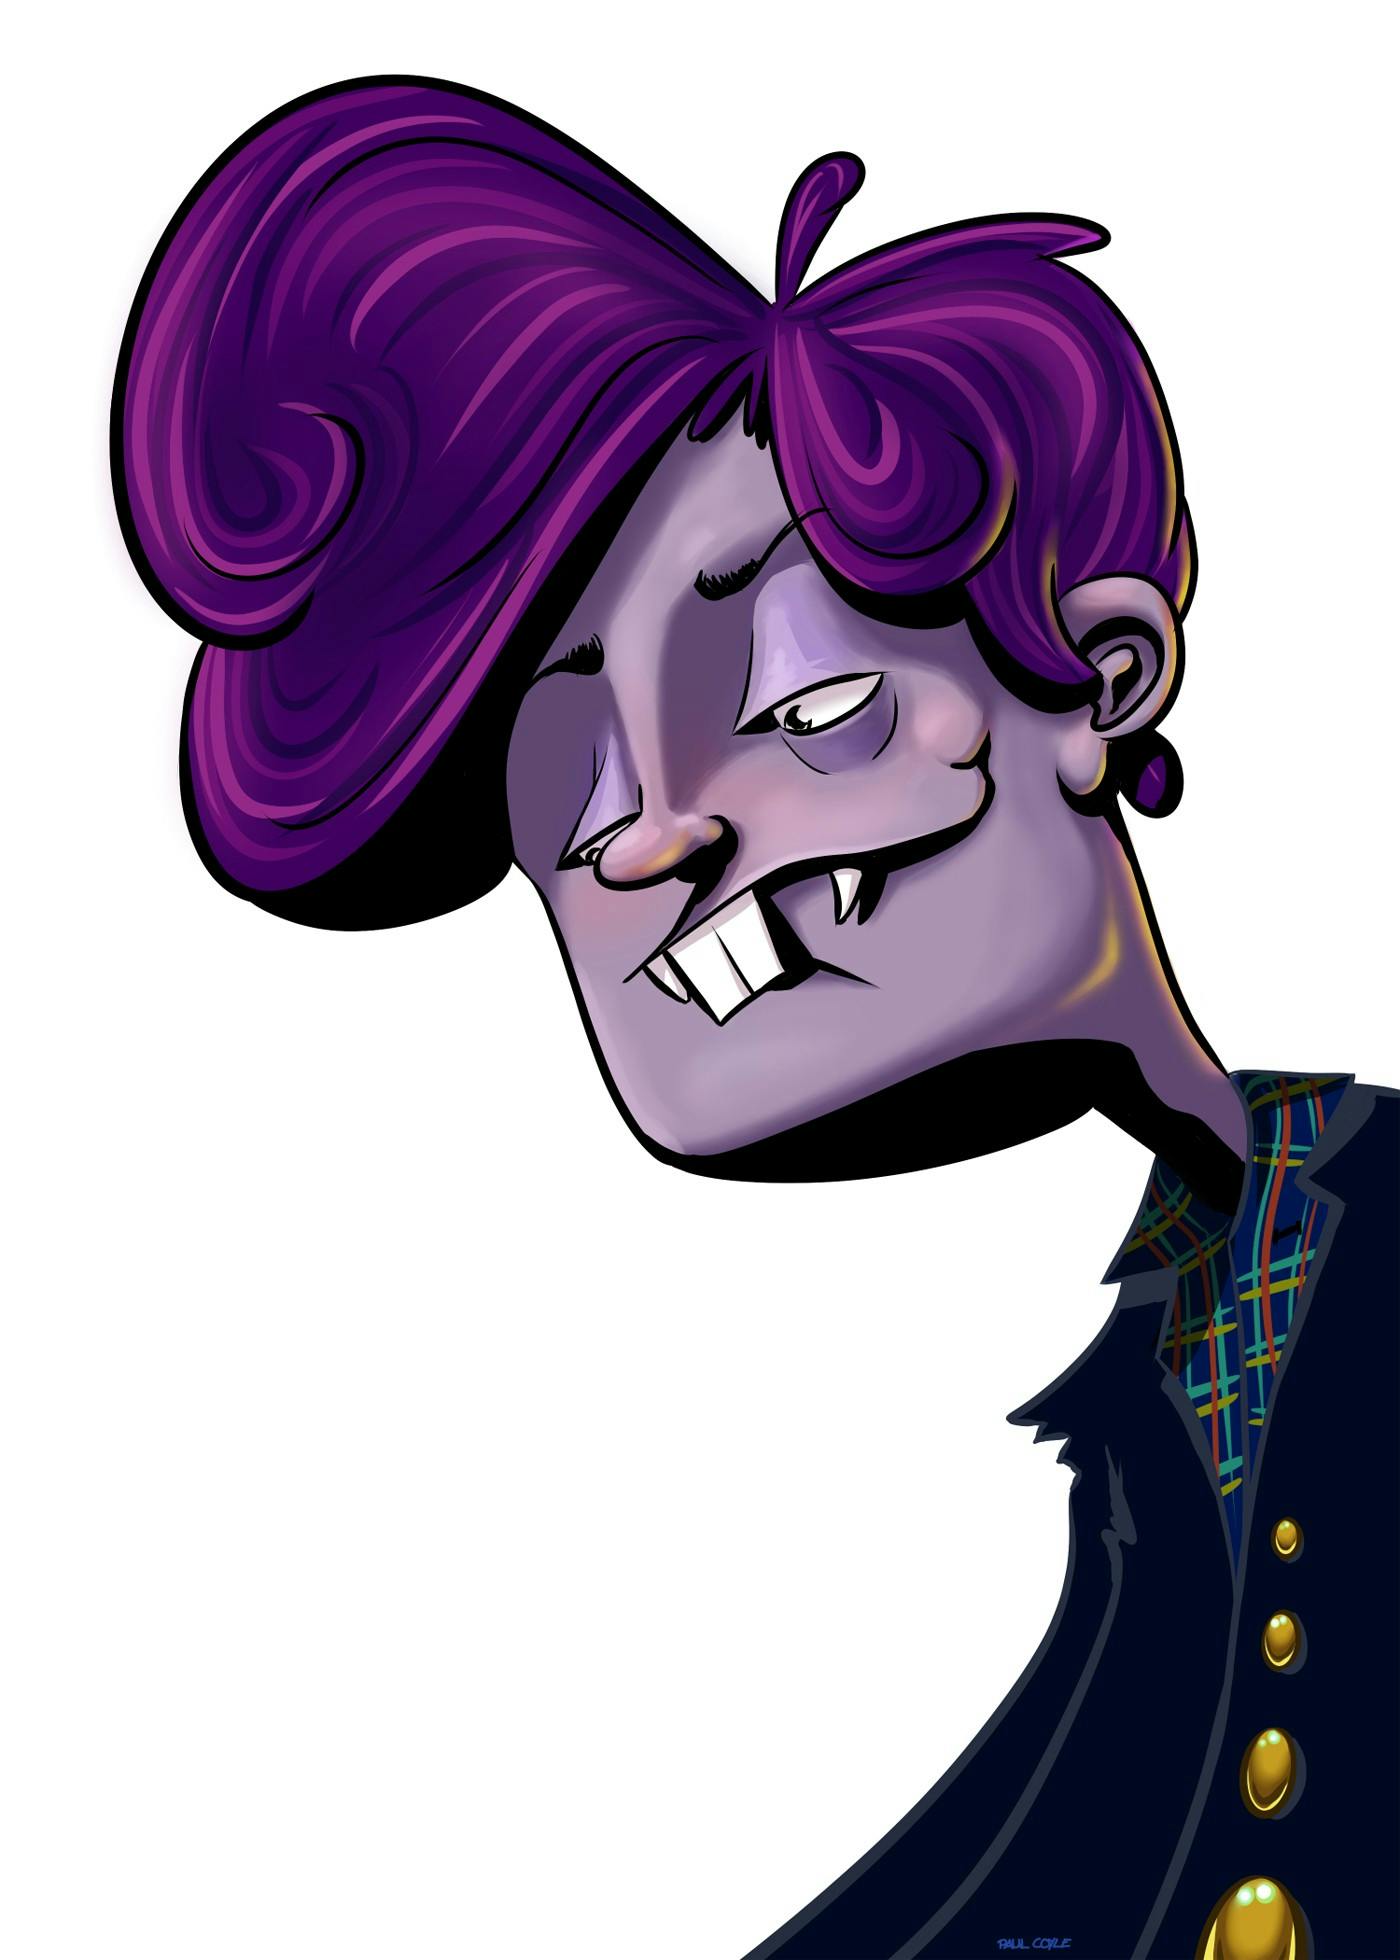 A digital illustration of a buck-toothed vampire with mauve skin and bouffant purple hair, wearing a dark purple overcoat with gold buttons.